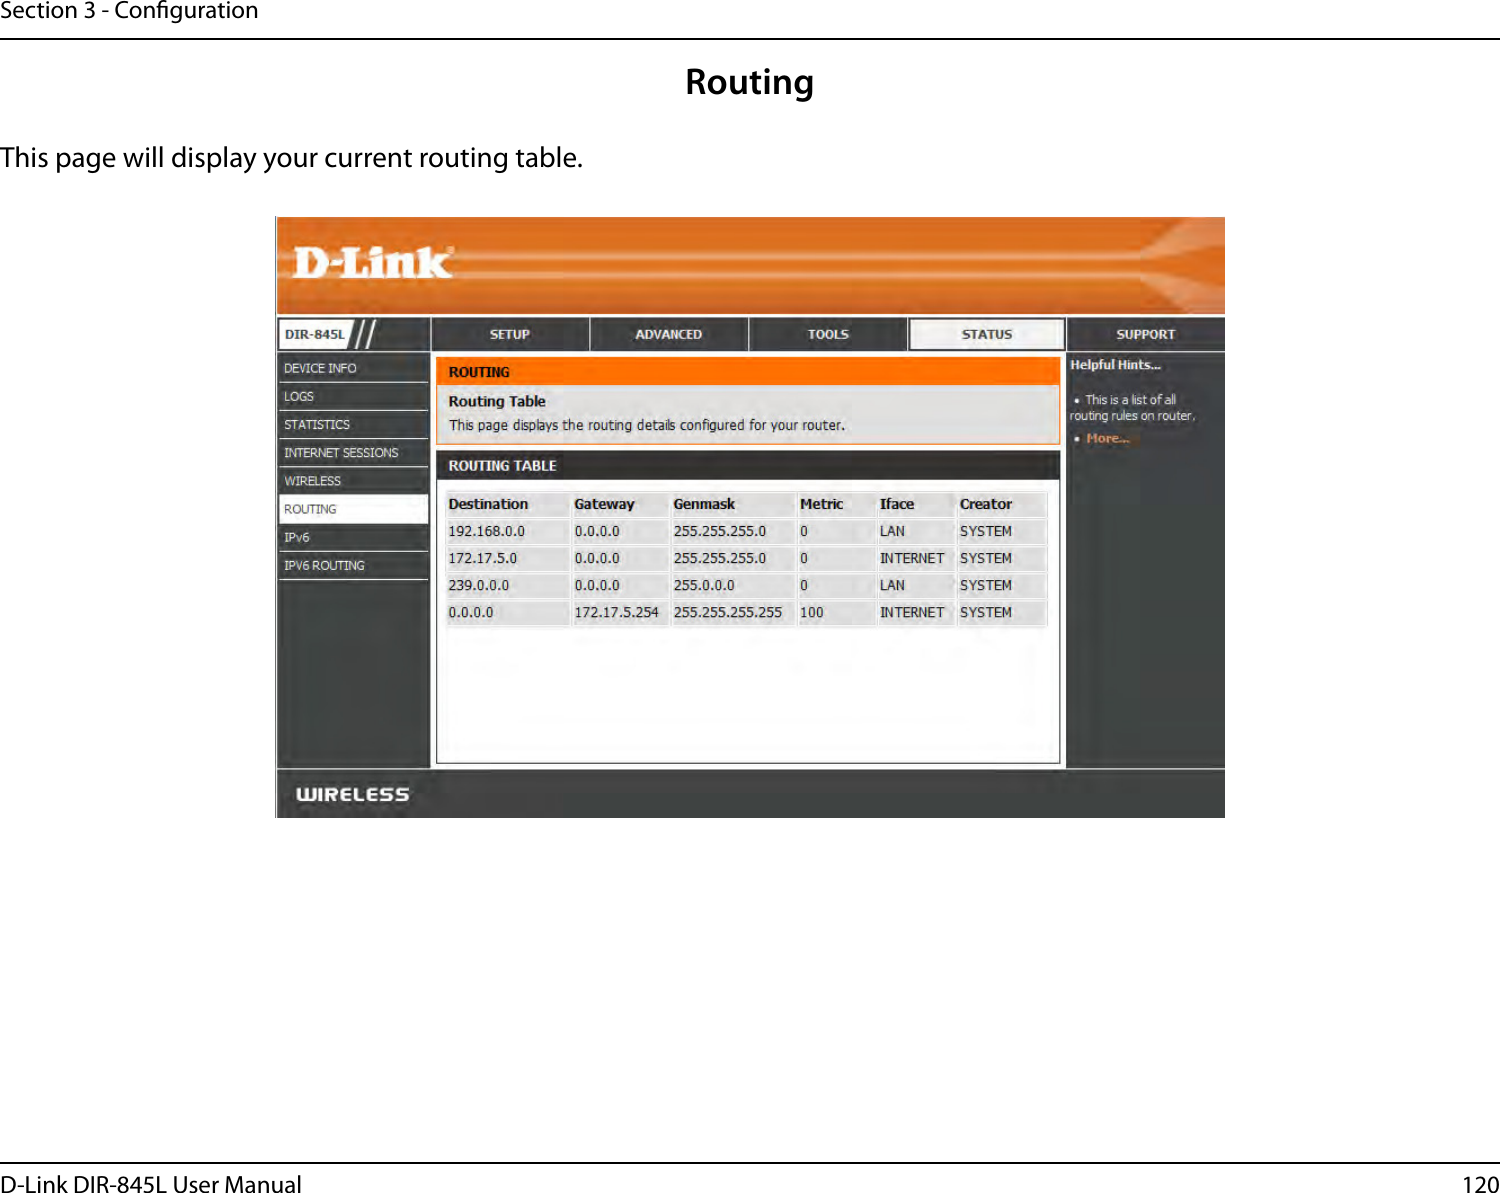 120D-Link DIR-845L User ManualSection 3 - CongurationRoutingThis page will display your current routing table.